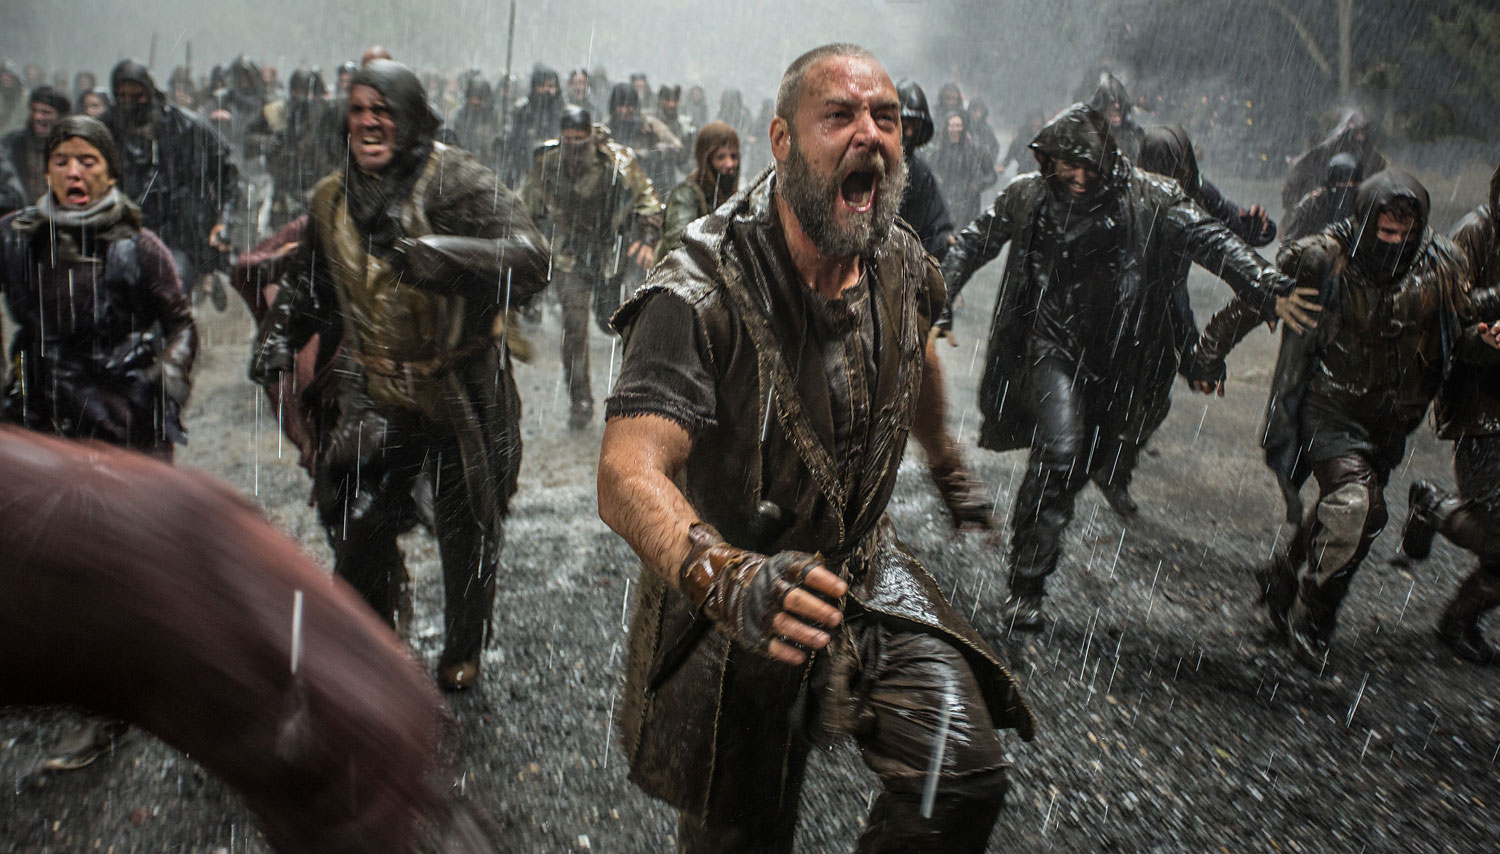 Russell Crowe in a scene from "Noah." (Niko Tavernise—Paramount Pictures/AP)